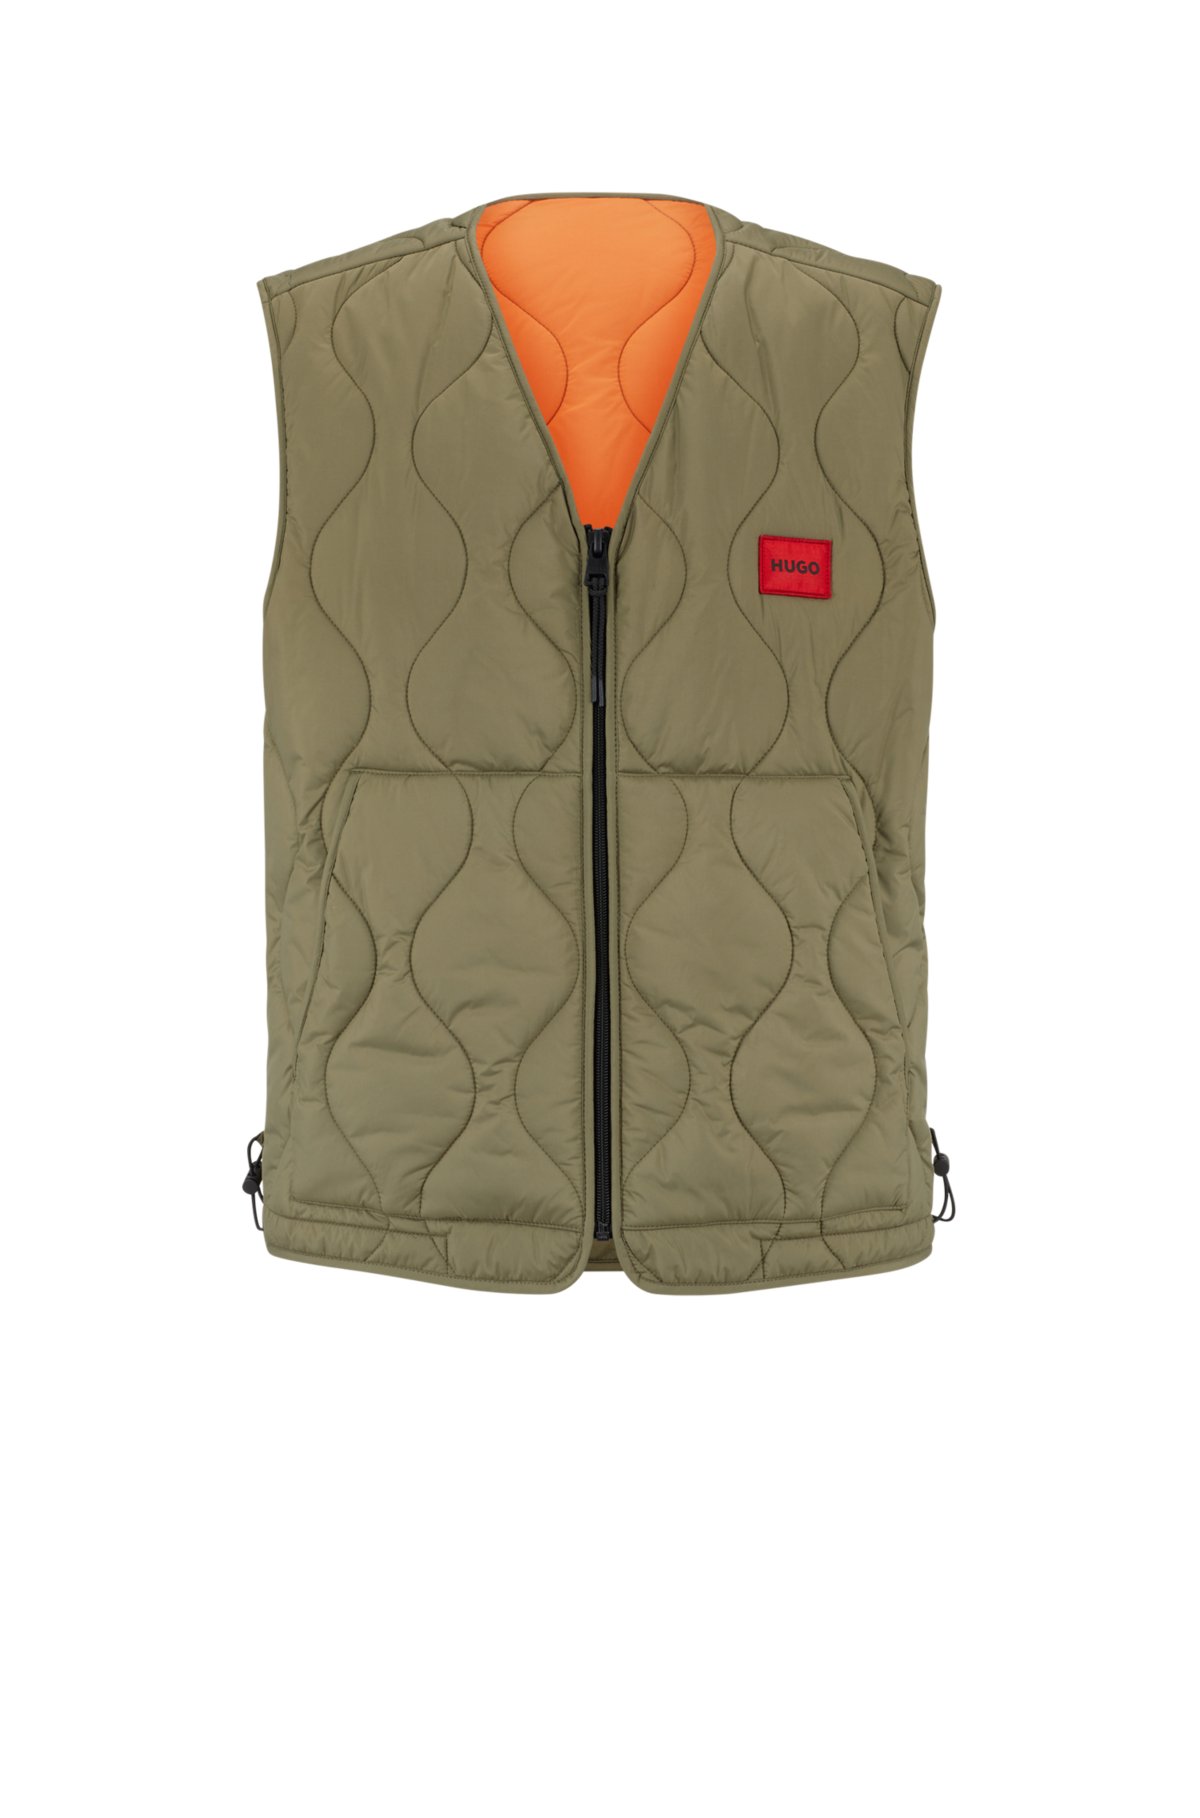 HUGO - Water-repellent logo with red gilet label